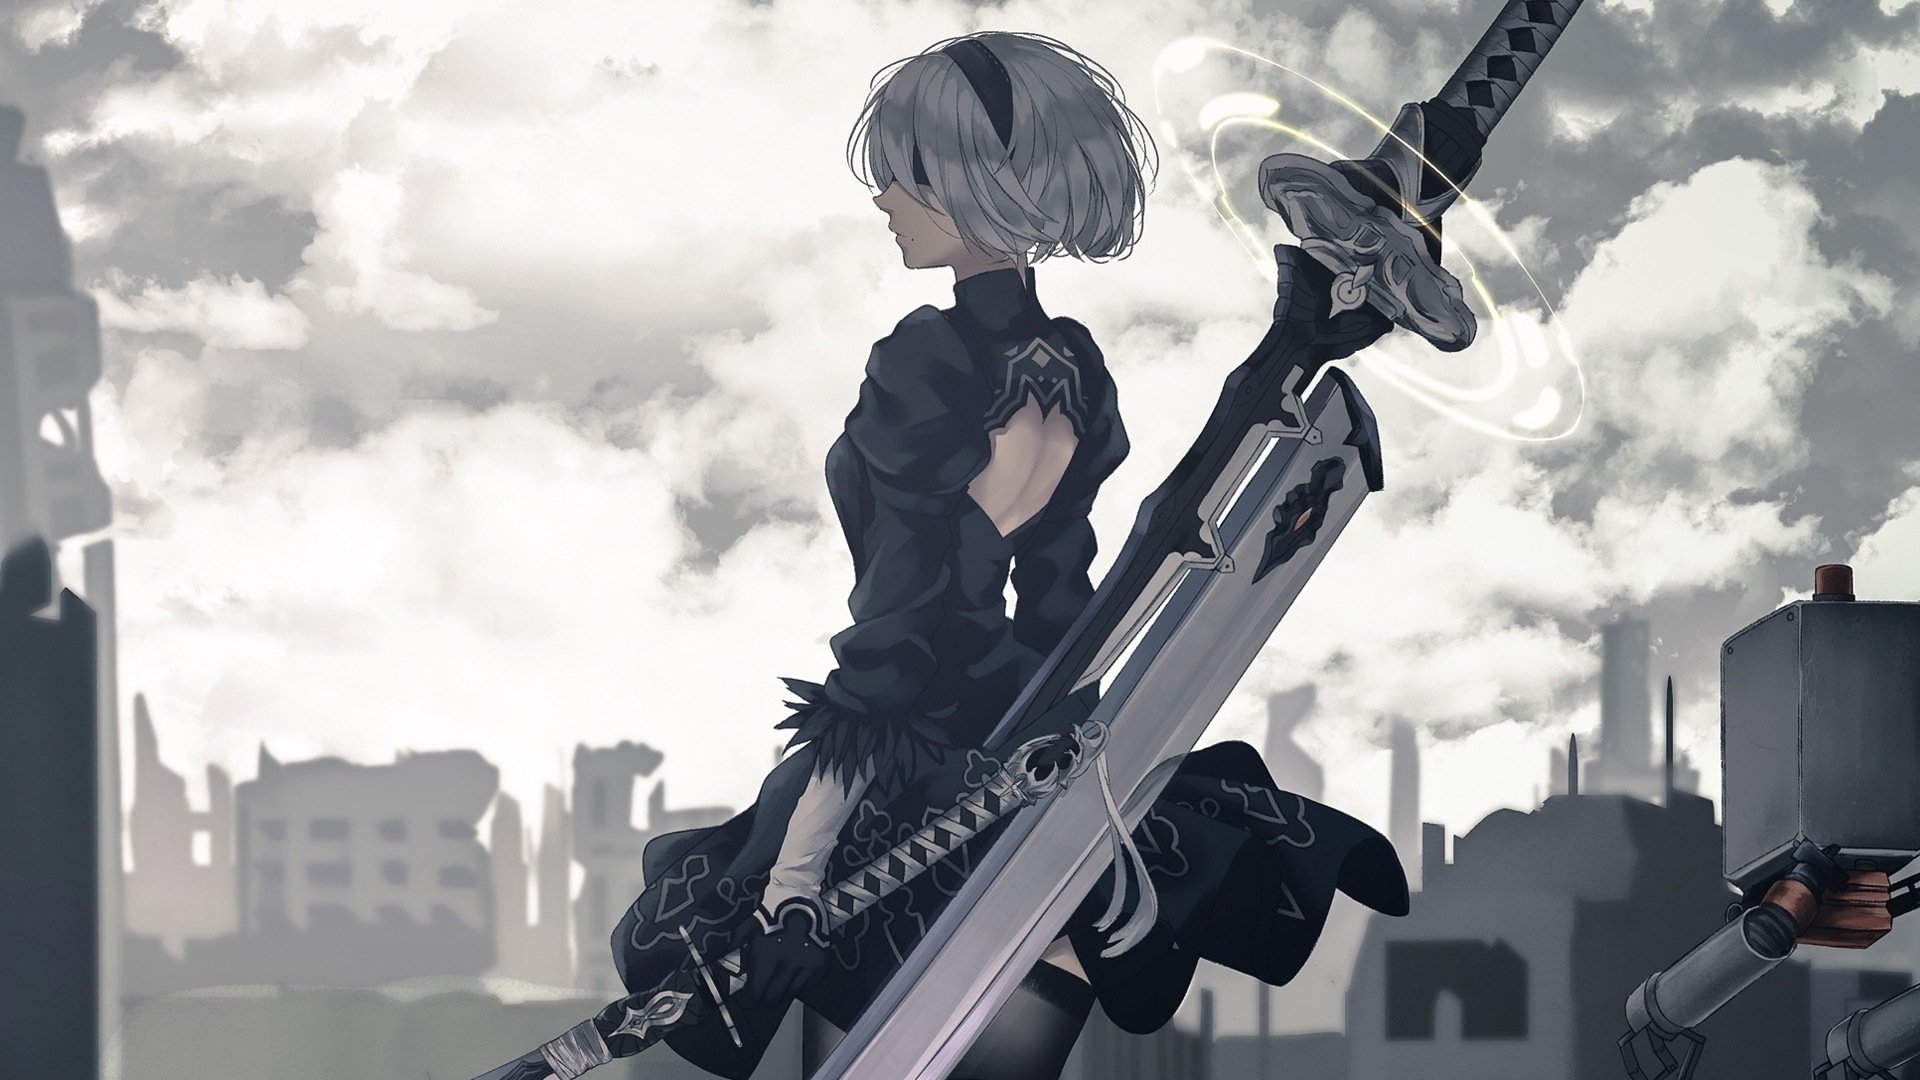 10 Most Popular Nier Automata Wallpaper 2B FULL HD 1920×1080 For PC Background 2020